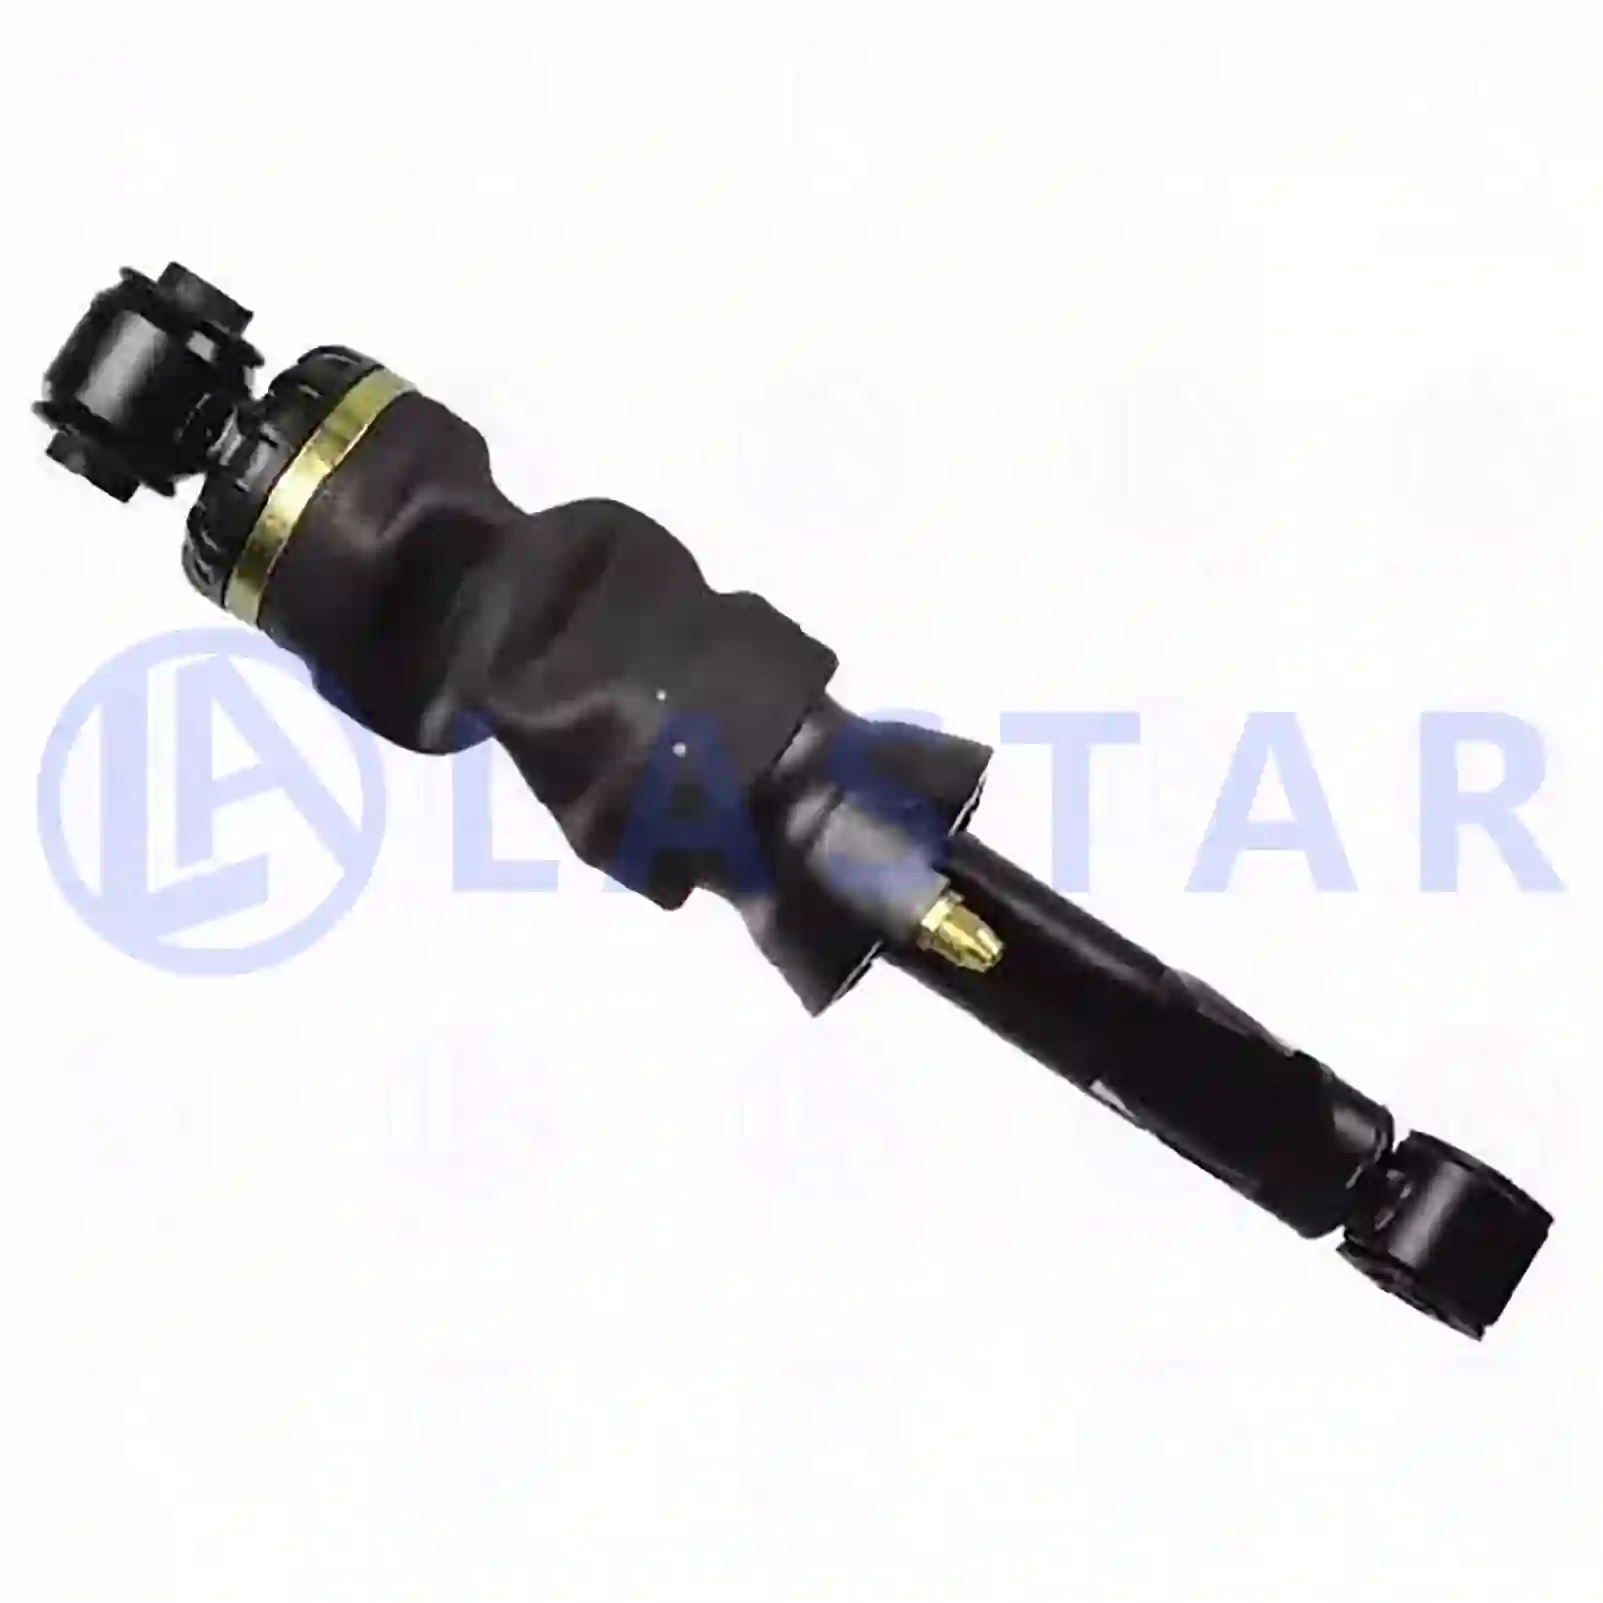 Cabin shock absorber, with air bellow, 77735595, 504060241, 97383888, ZG41224-0008, ||  77735595 Lastar Spare Part | Truck Spare Parts, Auotomotive Spare Parts Cabin shock absorber, with air bellow, 77735595, 504060241, 97383888, ZG41224-0008, ||  77735595 Lastar Spare Part | Truck Spare Parts, Auotomotive Spare Parts